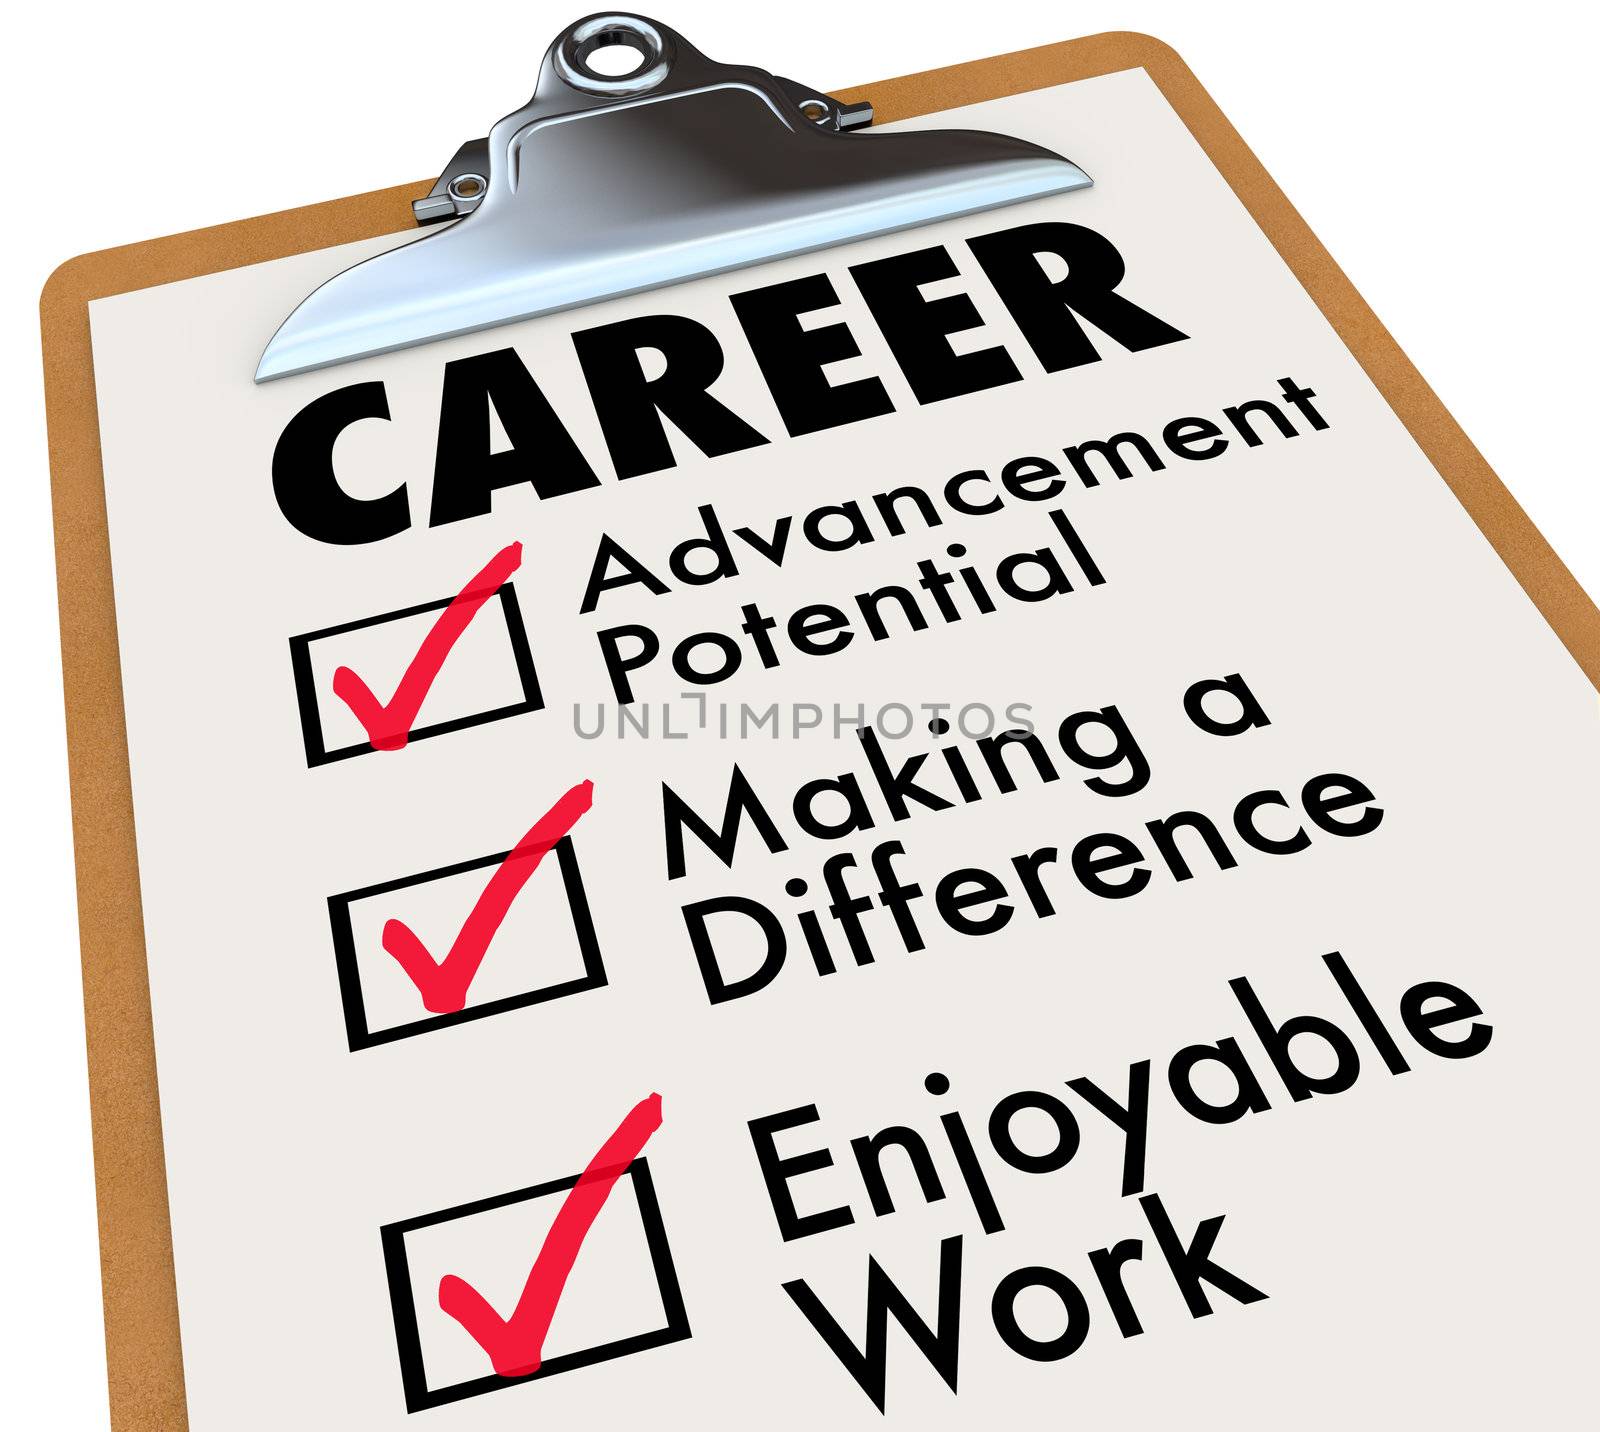 A checklist on a wooden clipboard with the word Career and the top priorities for your to achieve in your profession: Advancement Potential, Making a Difference and Enjoyable Work